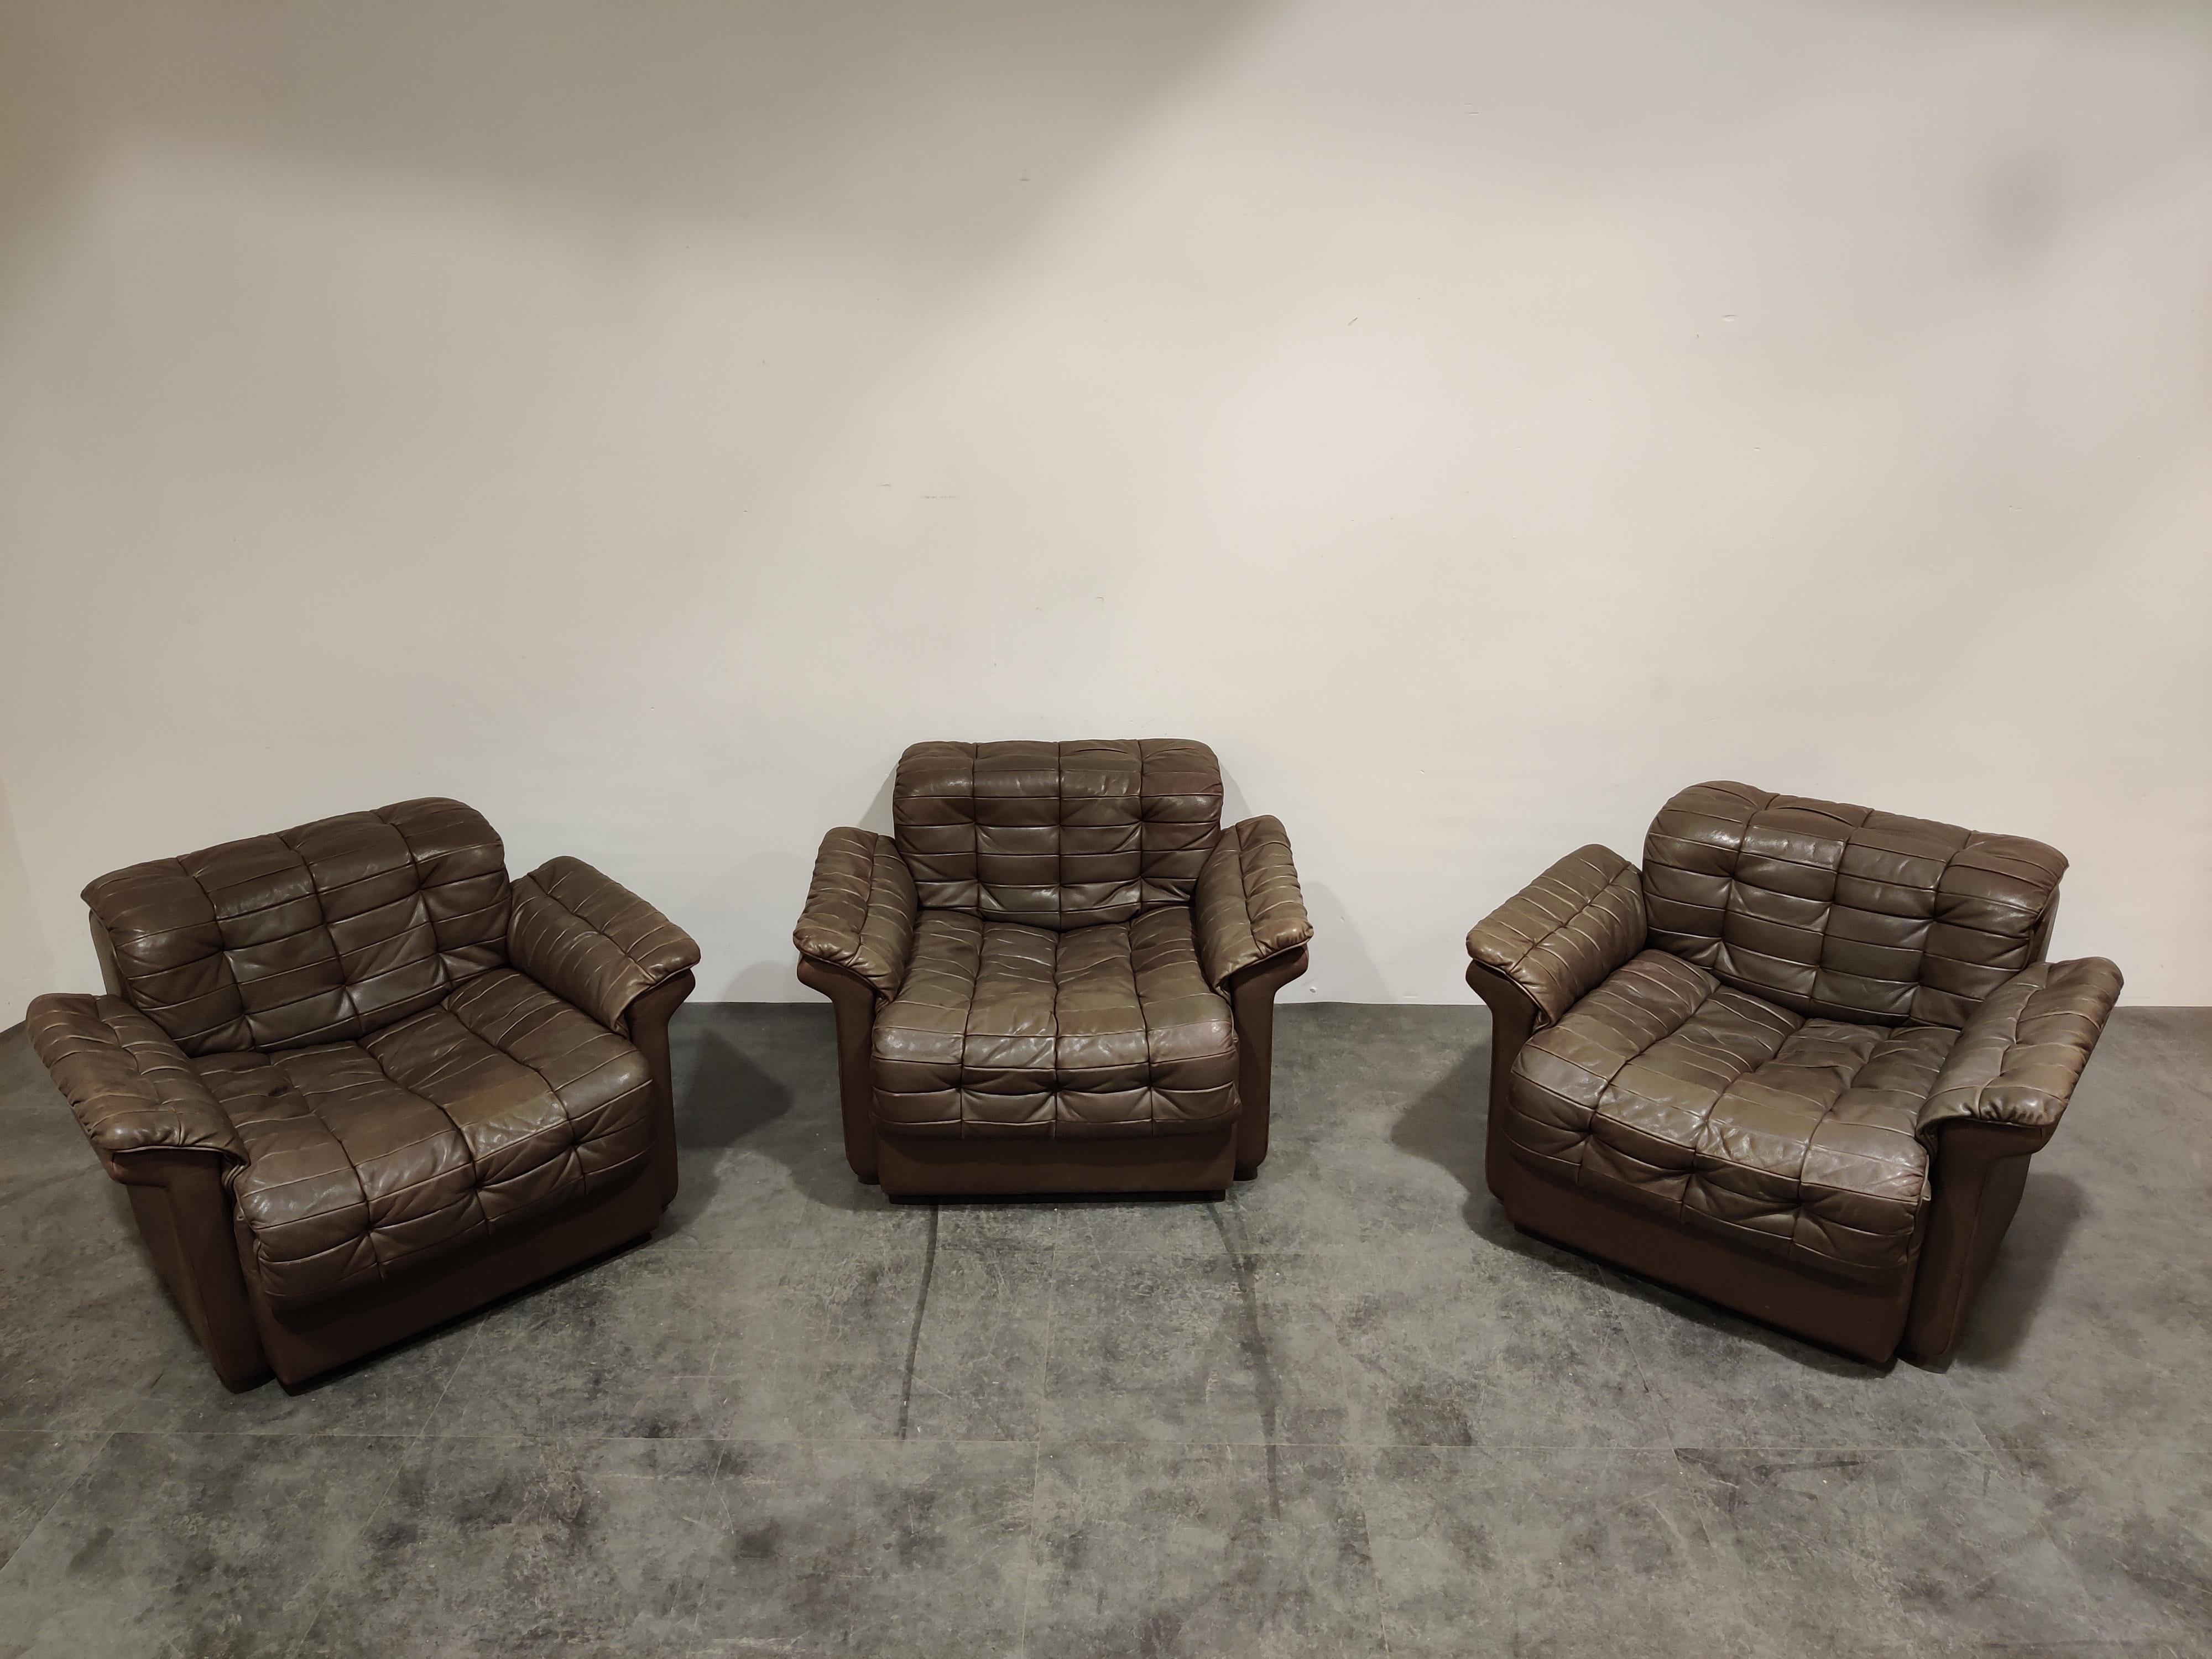 Vintage patchworl 'taupe' coloured leather (grey brown) armchairs by De Sede.

Model DS-11 - rare model, especially as armchairs.

As you would expect from De Sede, the chairs are very comfortable.

Good condition with normal age related wear.